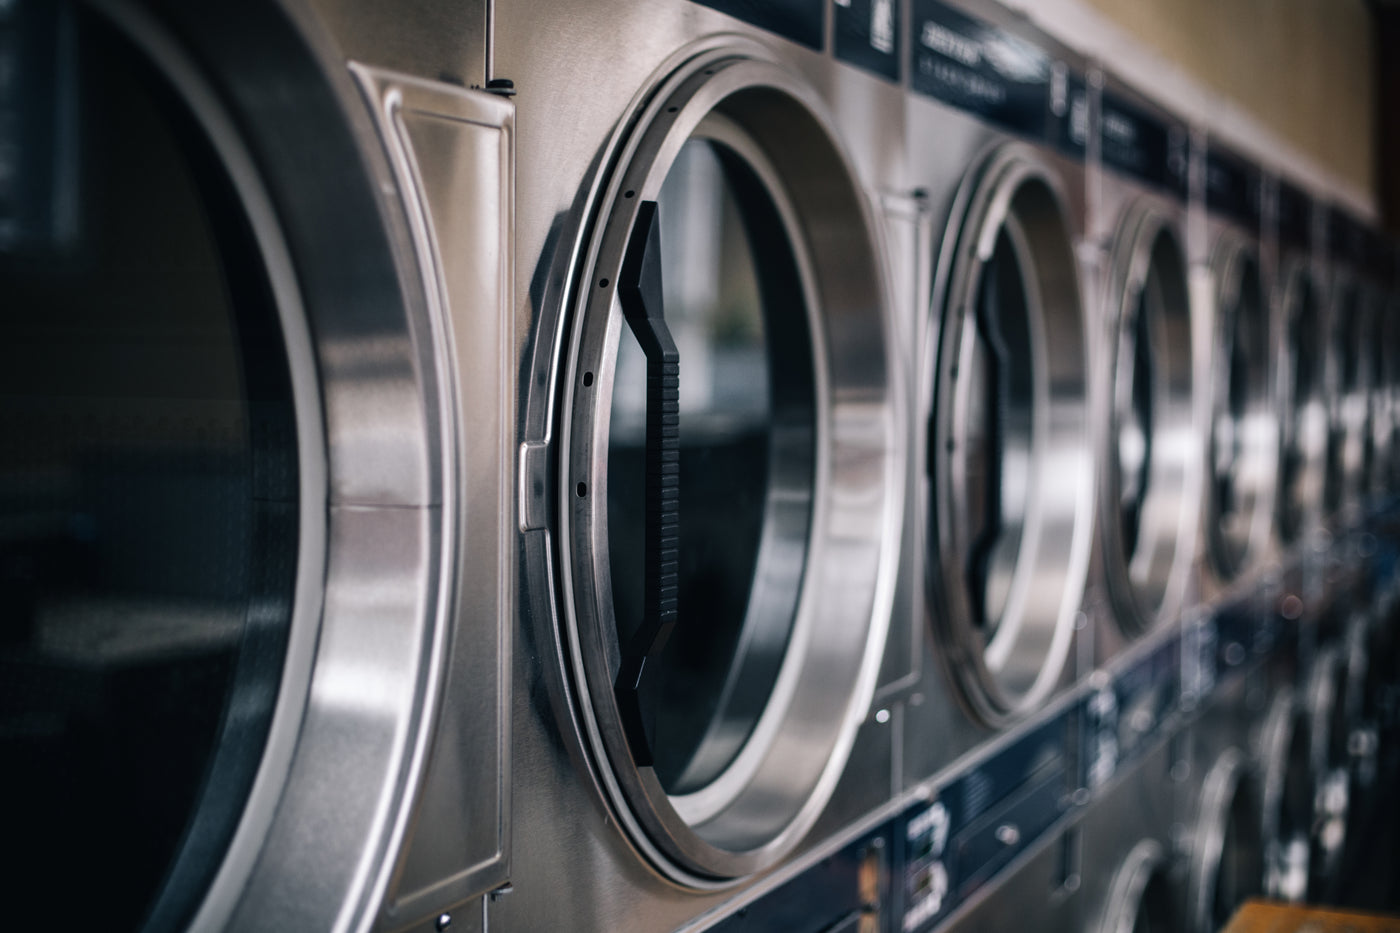 washing machines in a laundrette